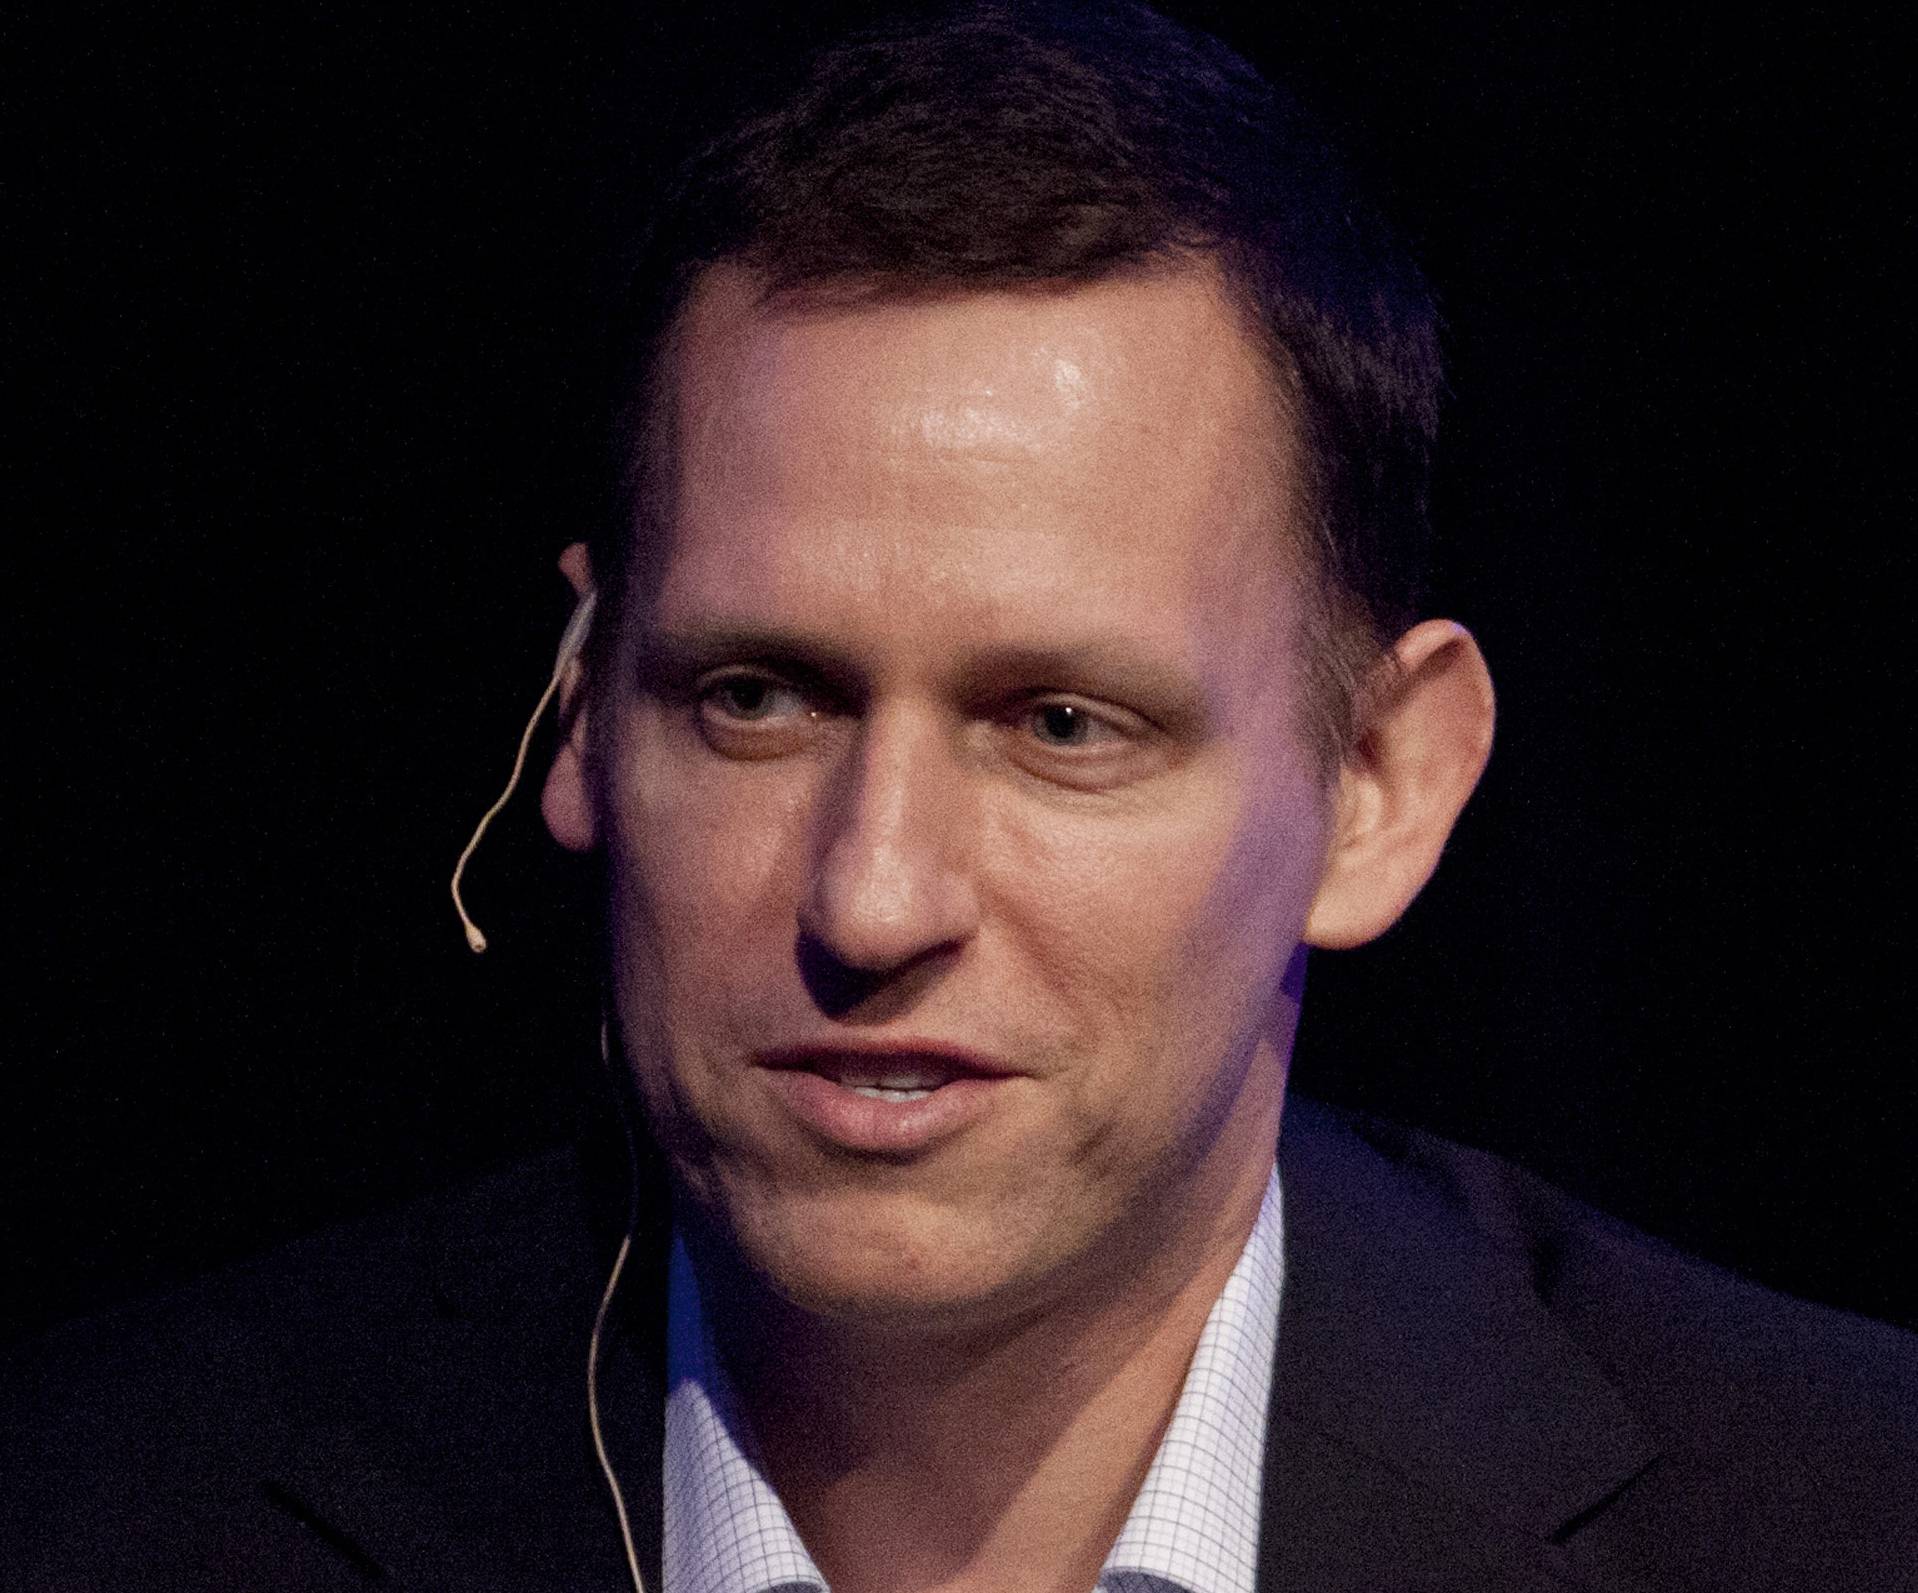 FILE - In this Thursday, March 8, 2012, file photo, Clarium Capital President Peter Thiel speaks during his keynote speech at the StartOut LGBT Entrepreneurship Awards in San Francisco. Seventeen years after it was born with the help of CIA seed money, Palantir Technologies is finally going public. Thiel, the iconoclastic entrepreneur and PayPal co-founder, holds the largest chunk of Palantir stock. (AP Photo/Ben Margot, File)